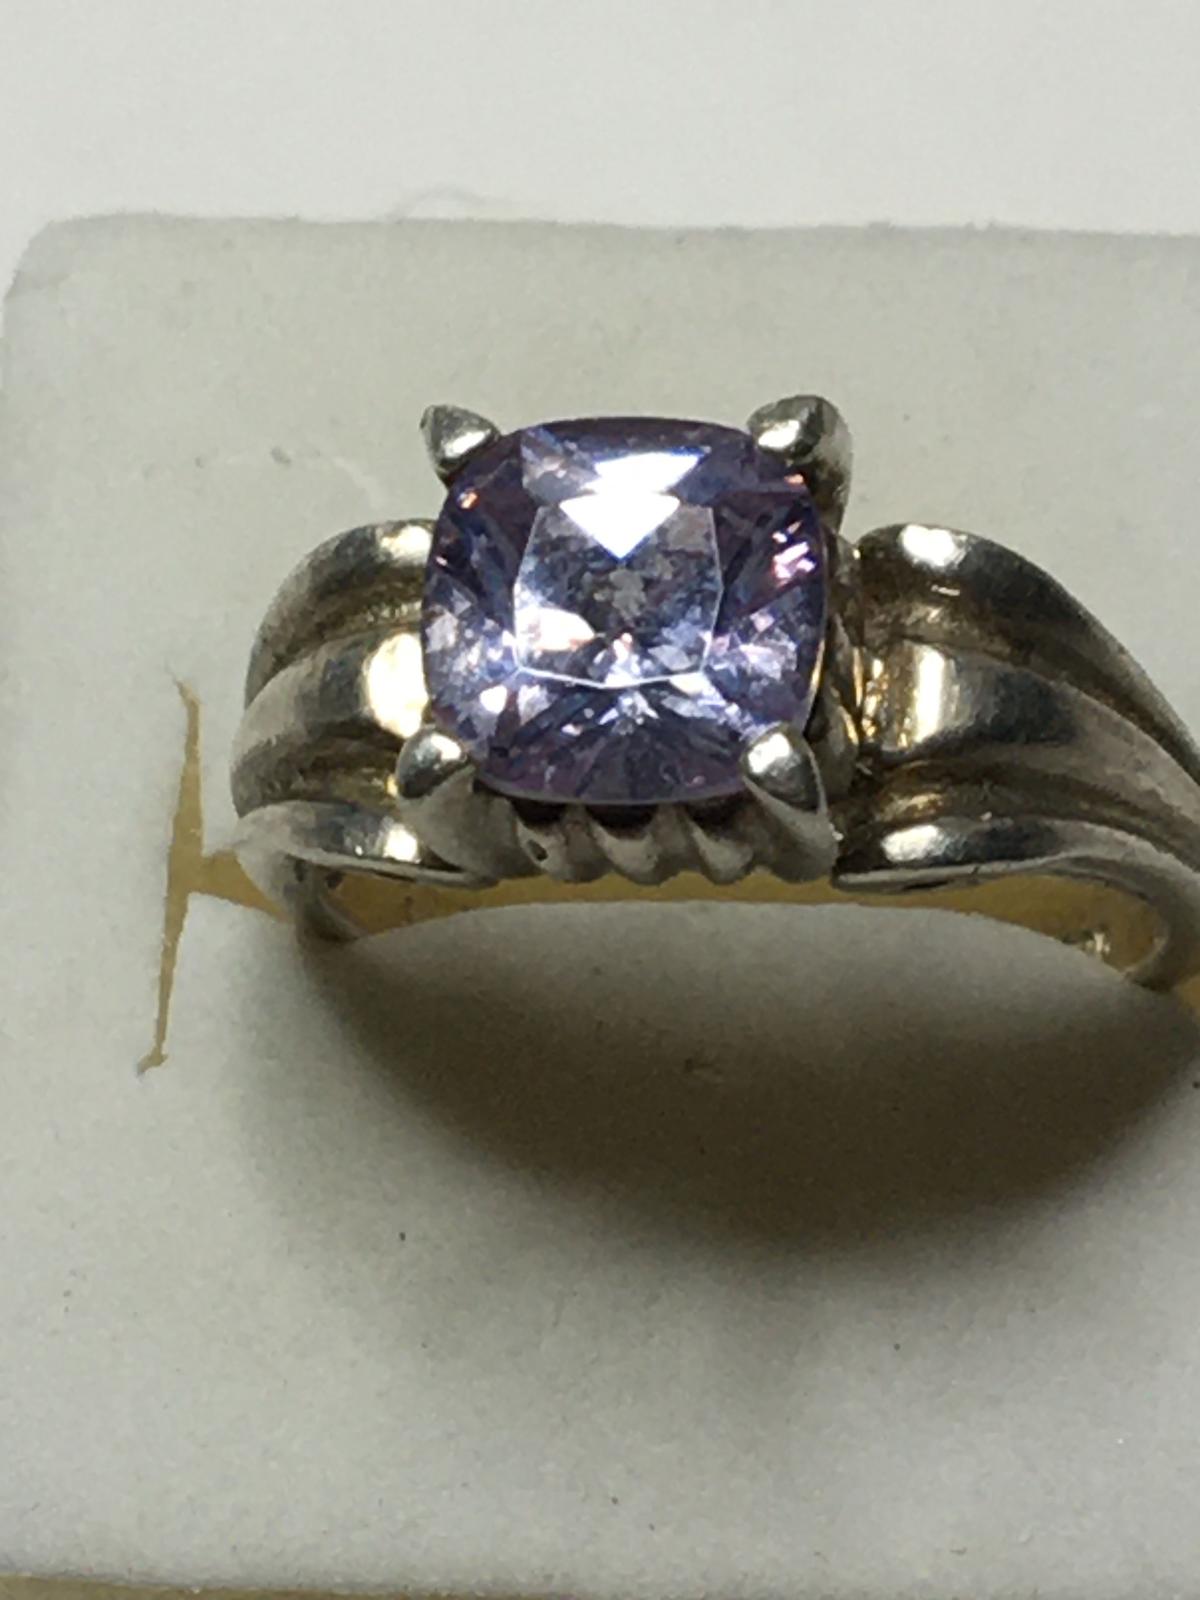 Pink Sapphire Antique Silver Ring Nice Big 2.5ct+ Gemstone Size 8 5.4 Grams